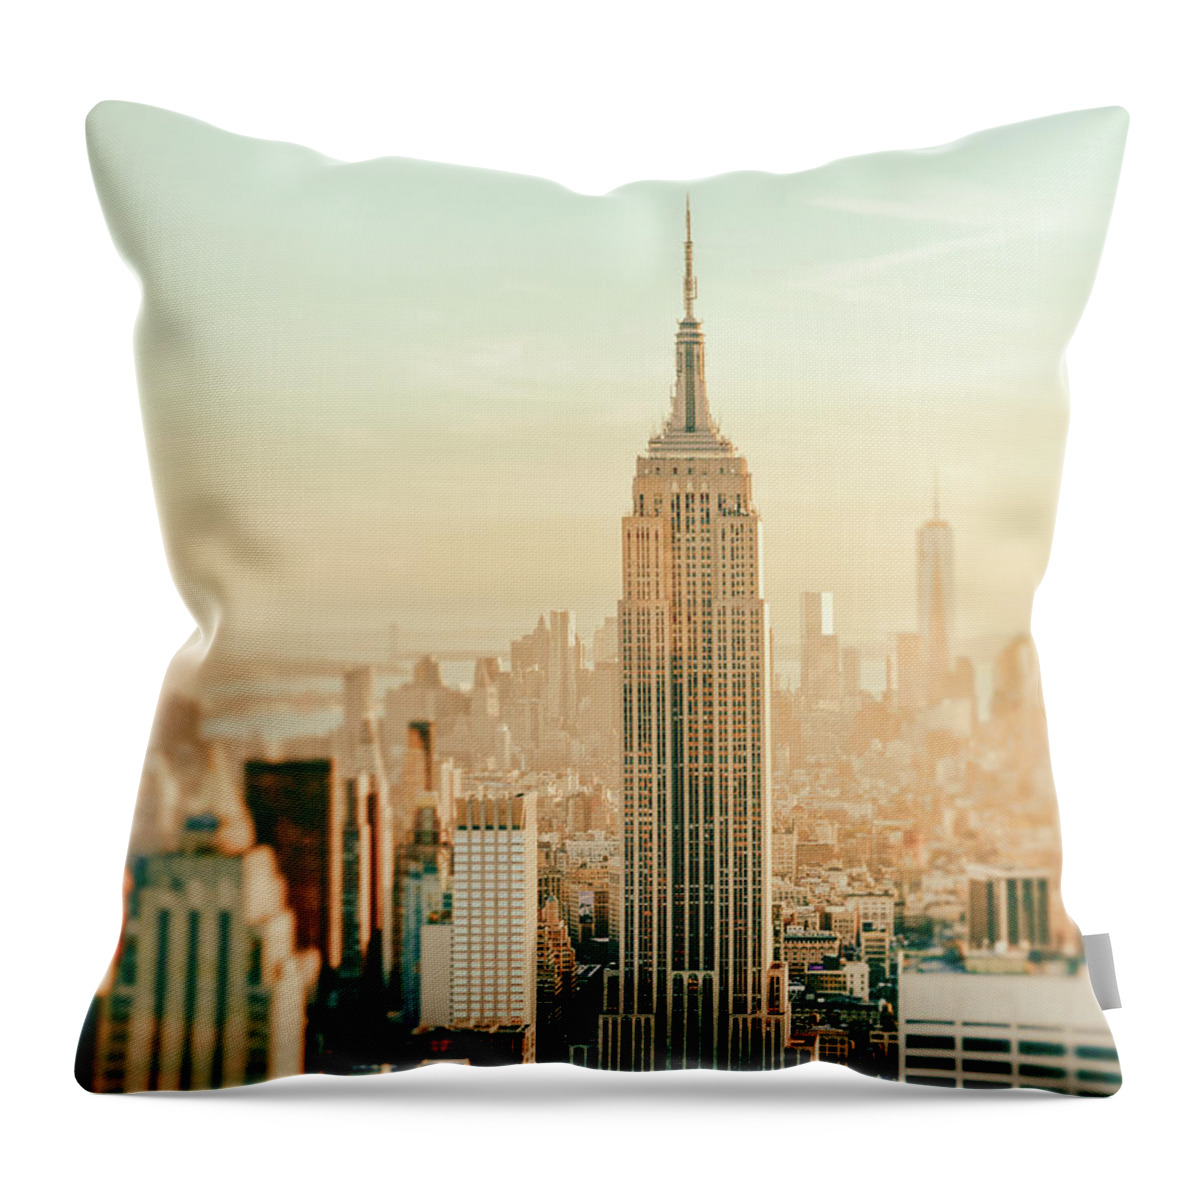 #faatoppicks Throw Pillow featuring the photograph New York City - Skyline Dream by Vivienne Gucwa